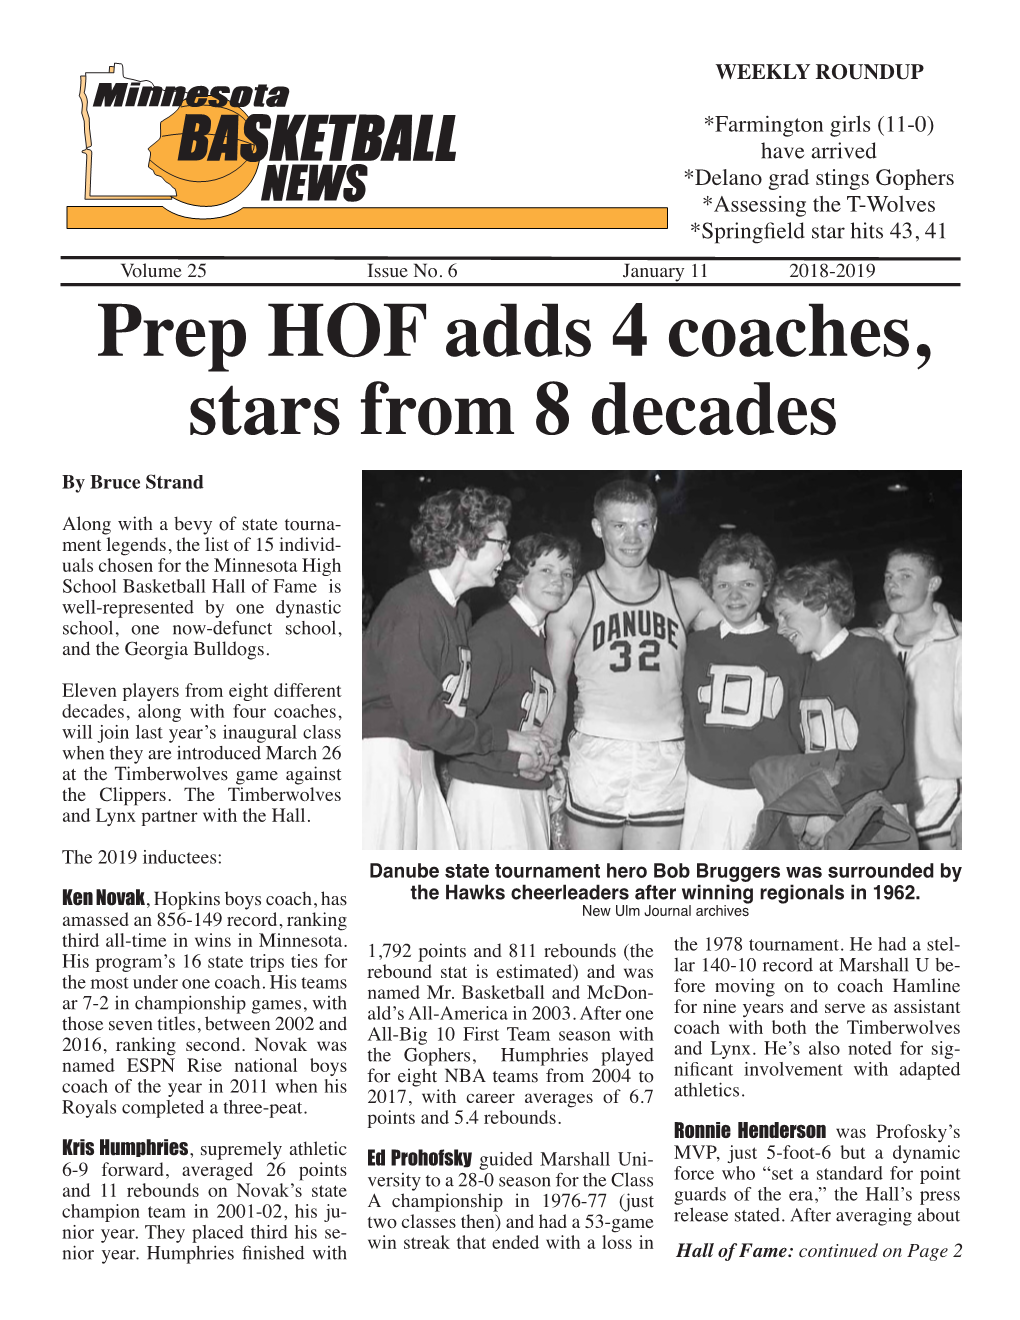 Prep HOF Adds 4 Coaches, Stars from 8 Decades by Bruce Strand